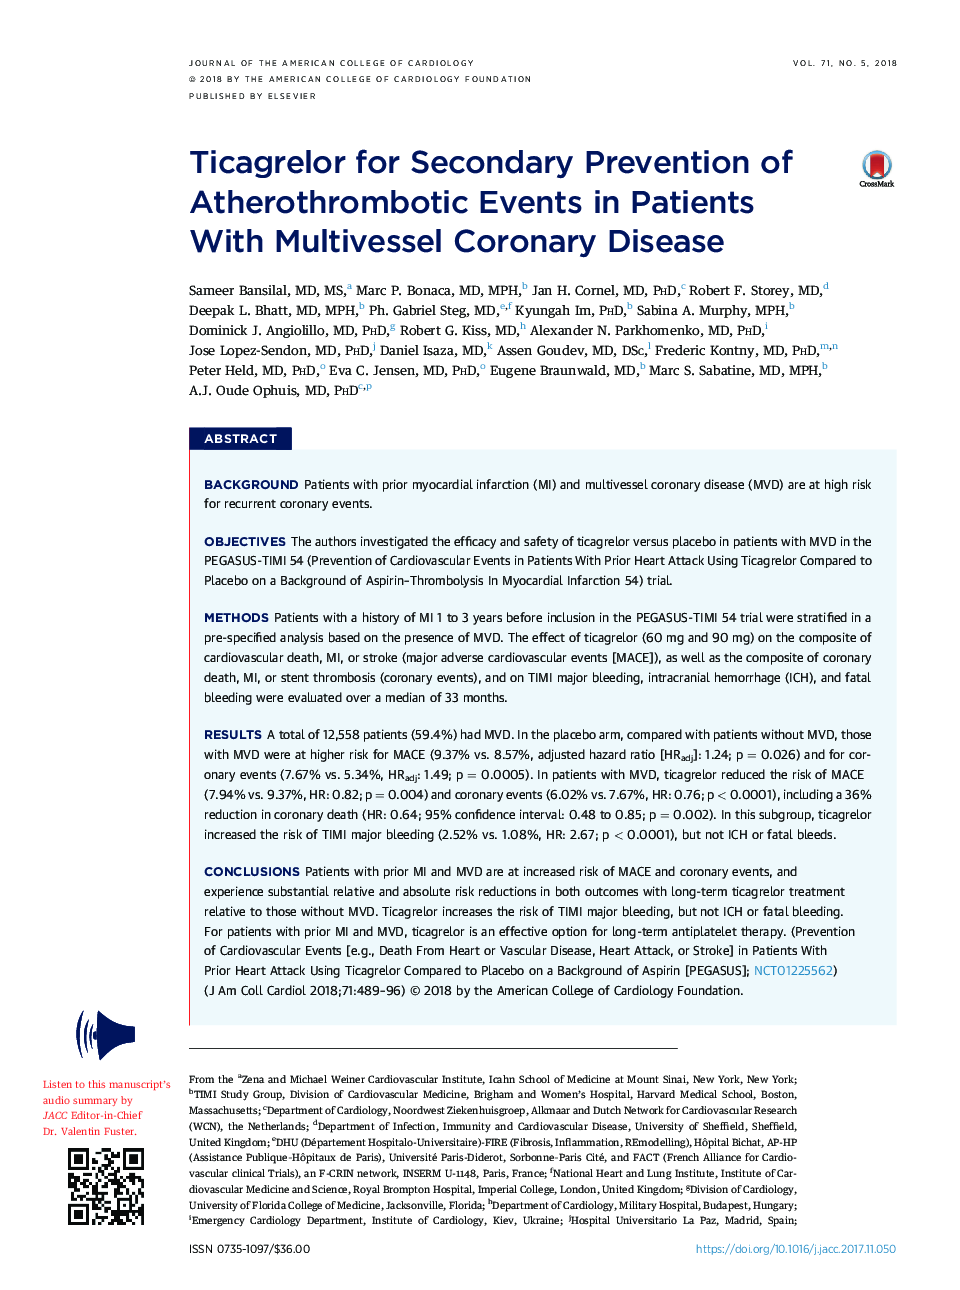 Ticagrelor for Secondary Prevention of Atherothrombotic Events in Patients WithÂ Multivessel Coronary Disease